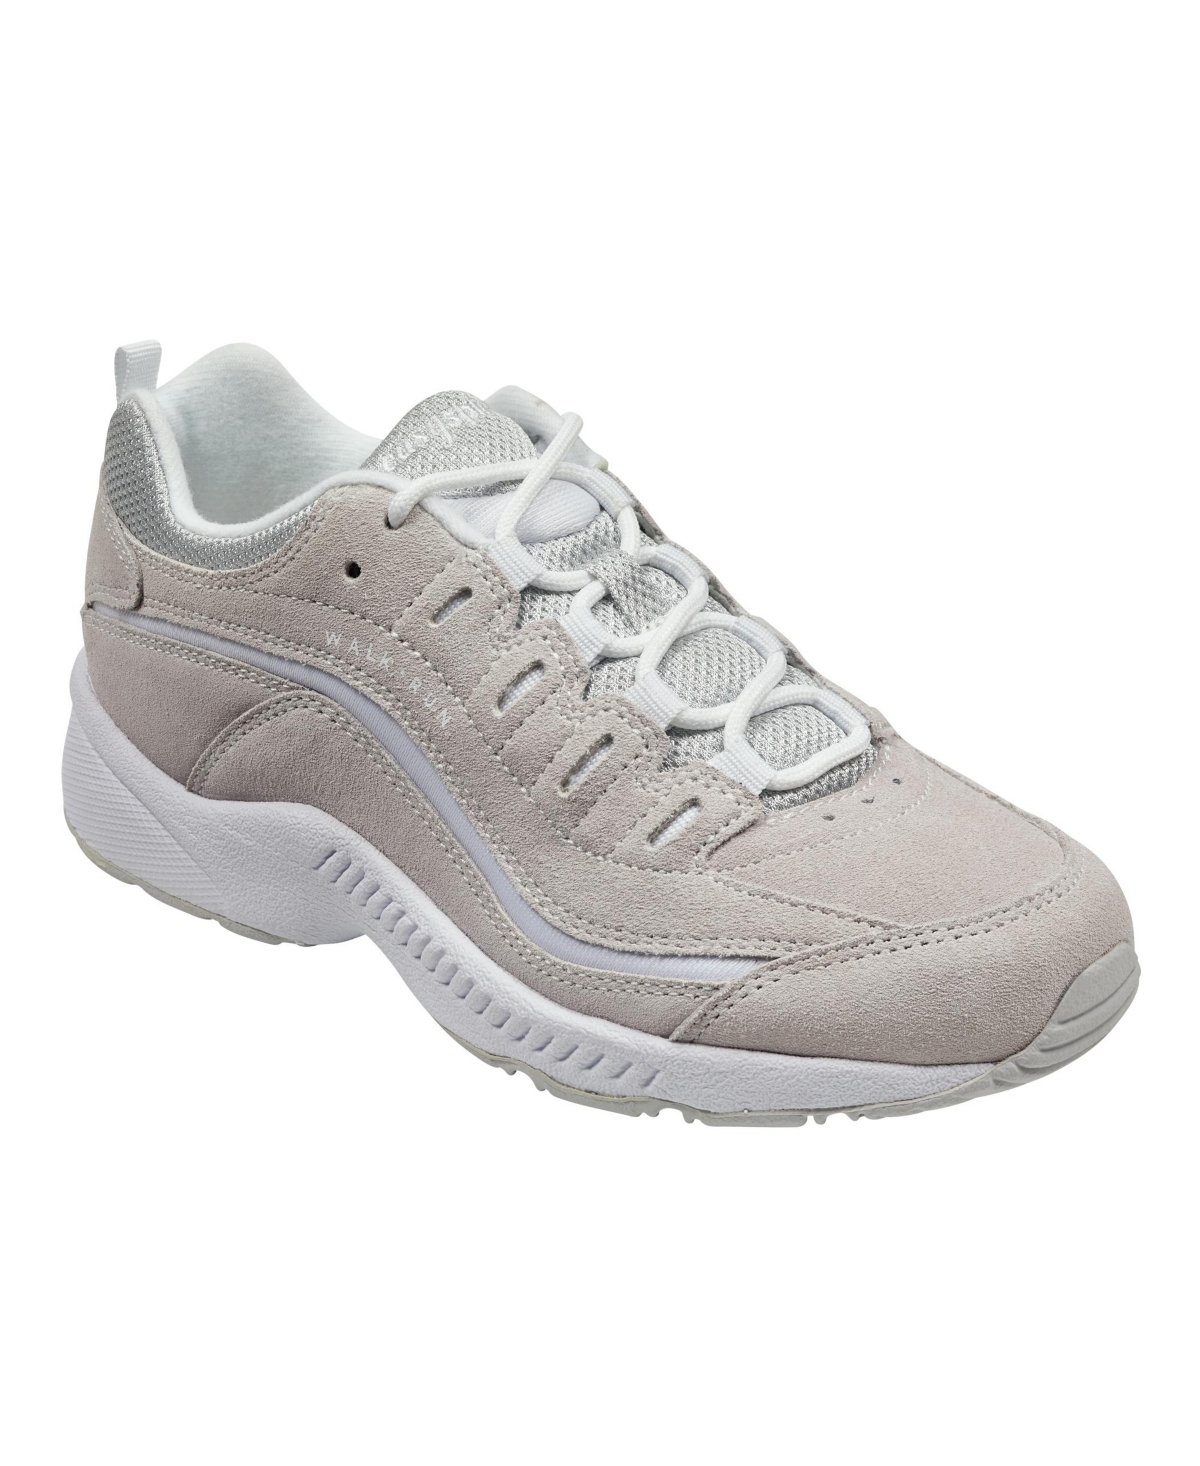 UPC 191656311883 product image for Easy Spirit Women's Romy Round Toe Casual Lace Up Walking Shoes Women's Shoes | upcitemdb.com